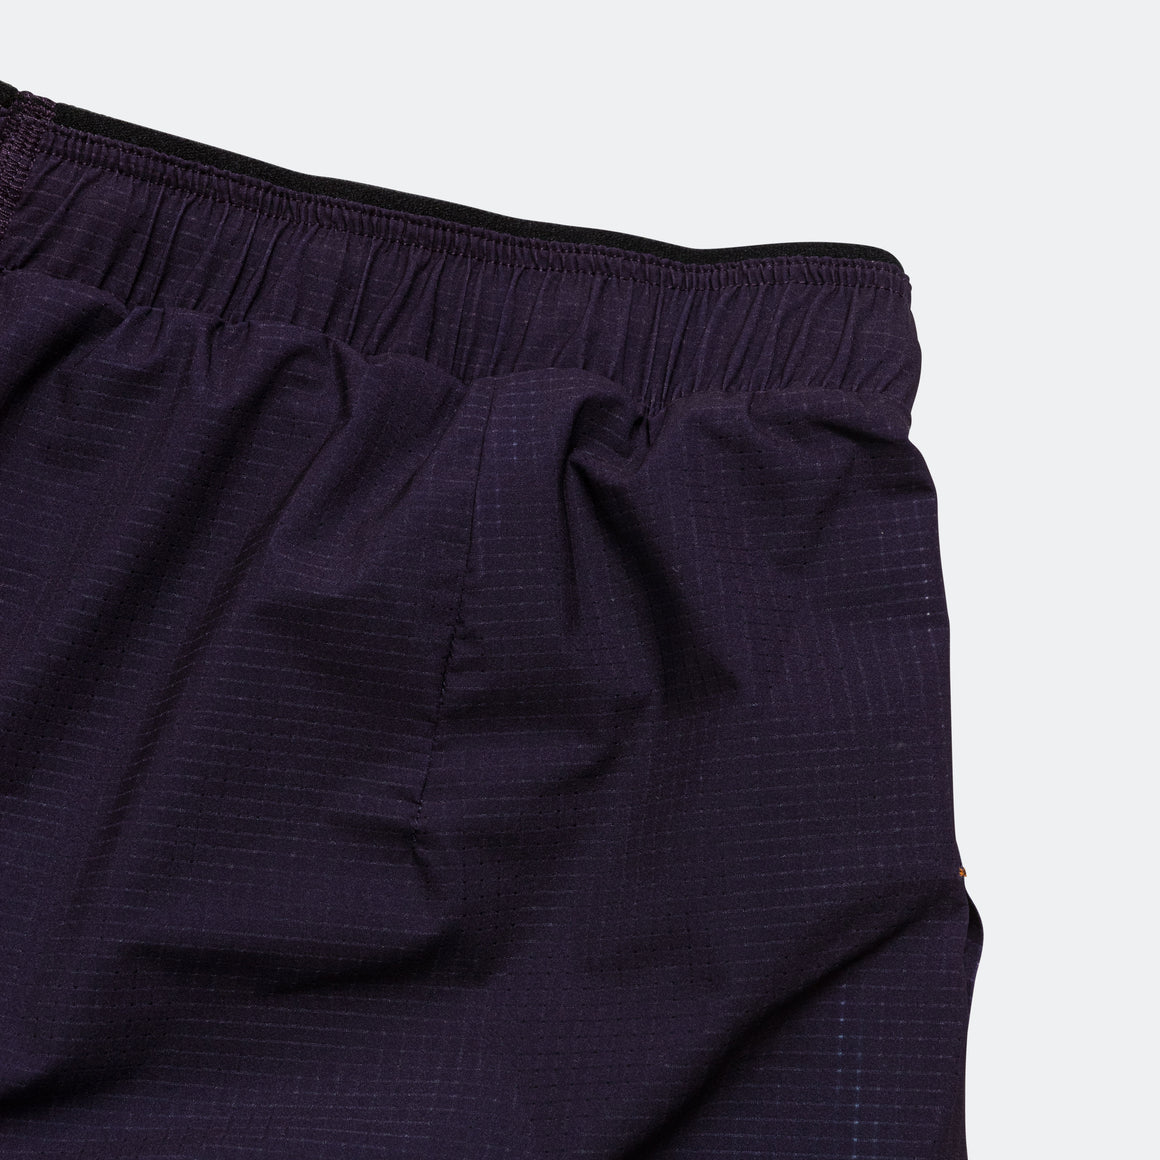 Soar Mens Race Shorts - Purple | Up There Athletics